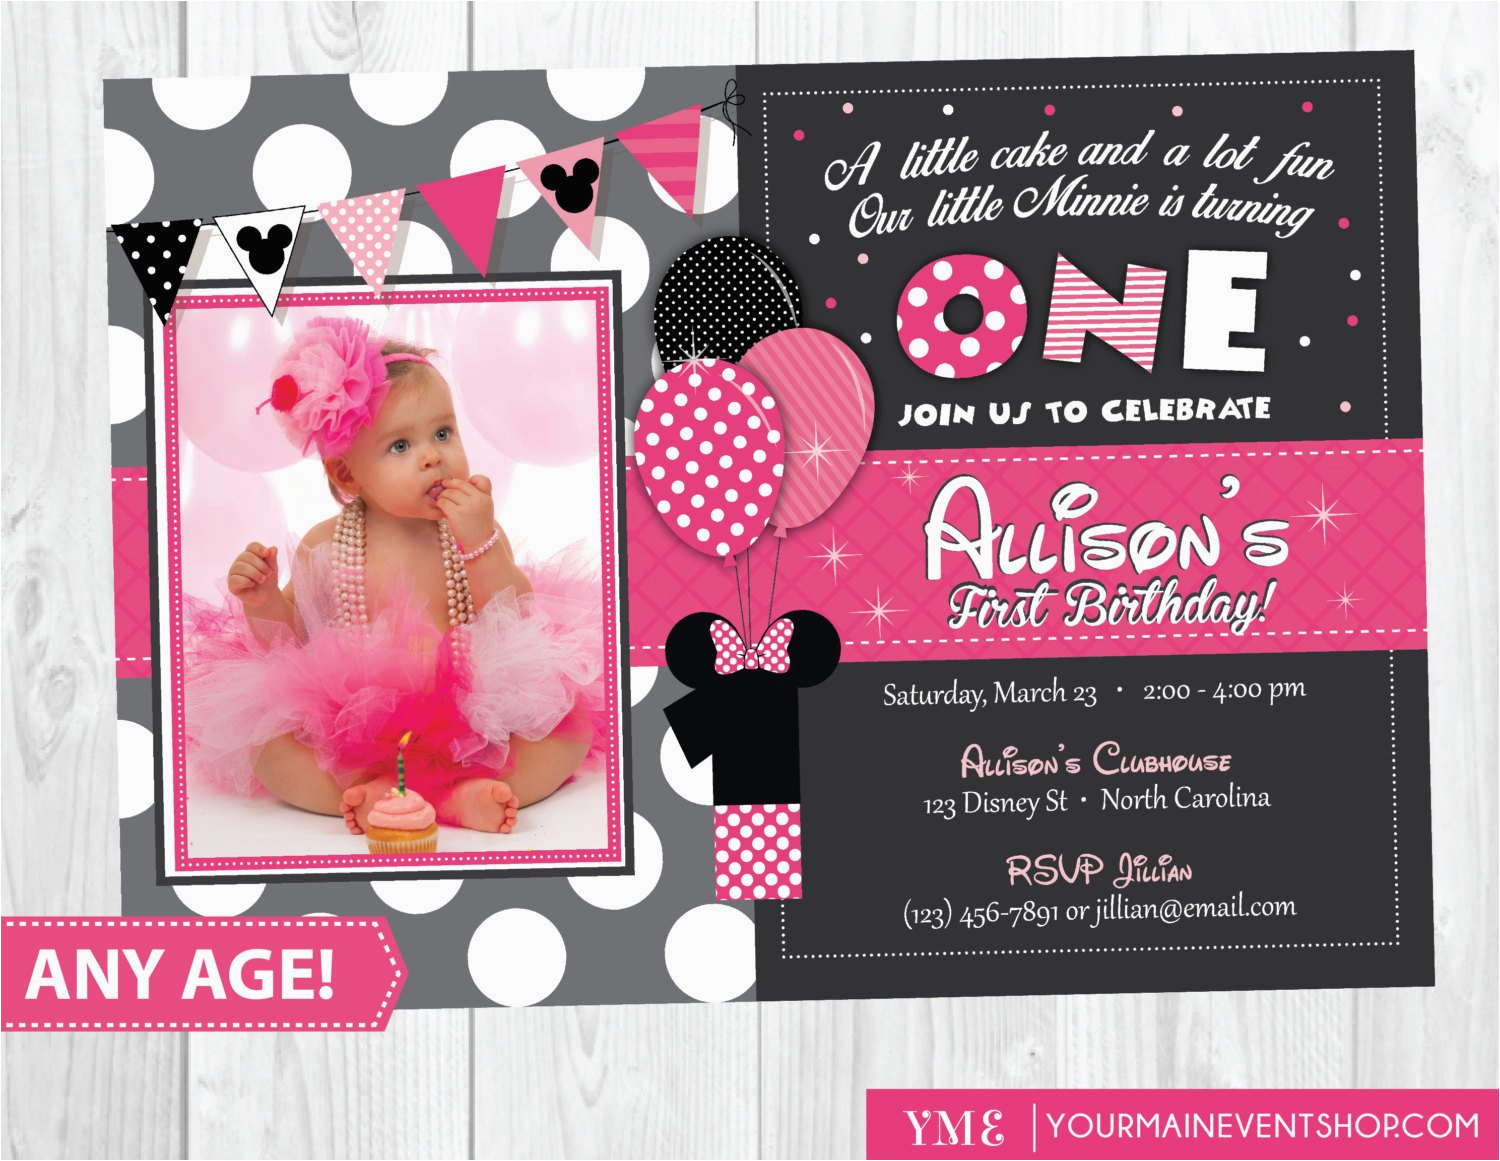 Minnie Mouse 1st Birthday Invites Minnie Mouse Birthday Invitation Minnie Mouse Inspired